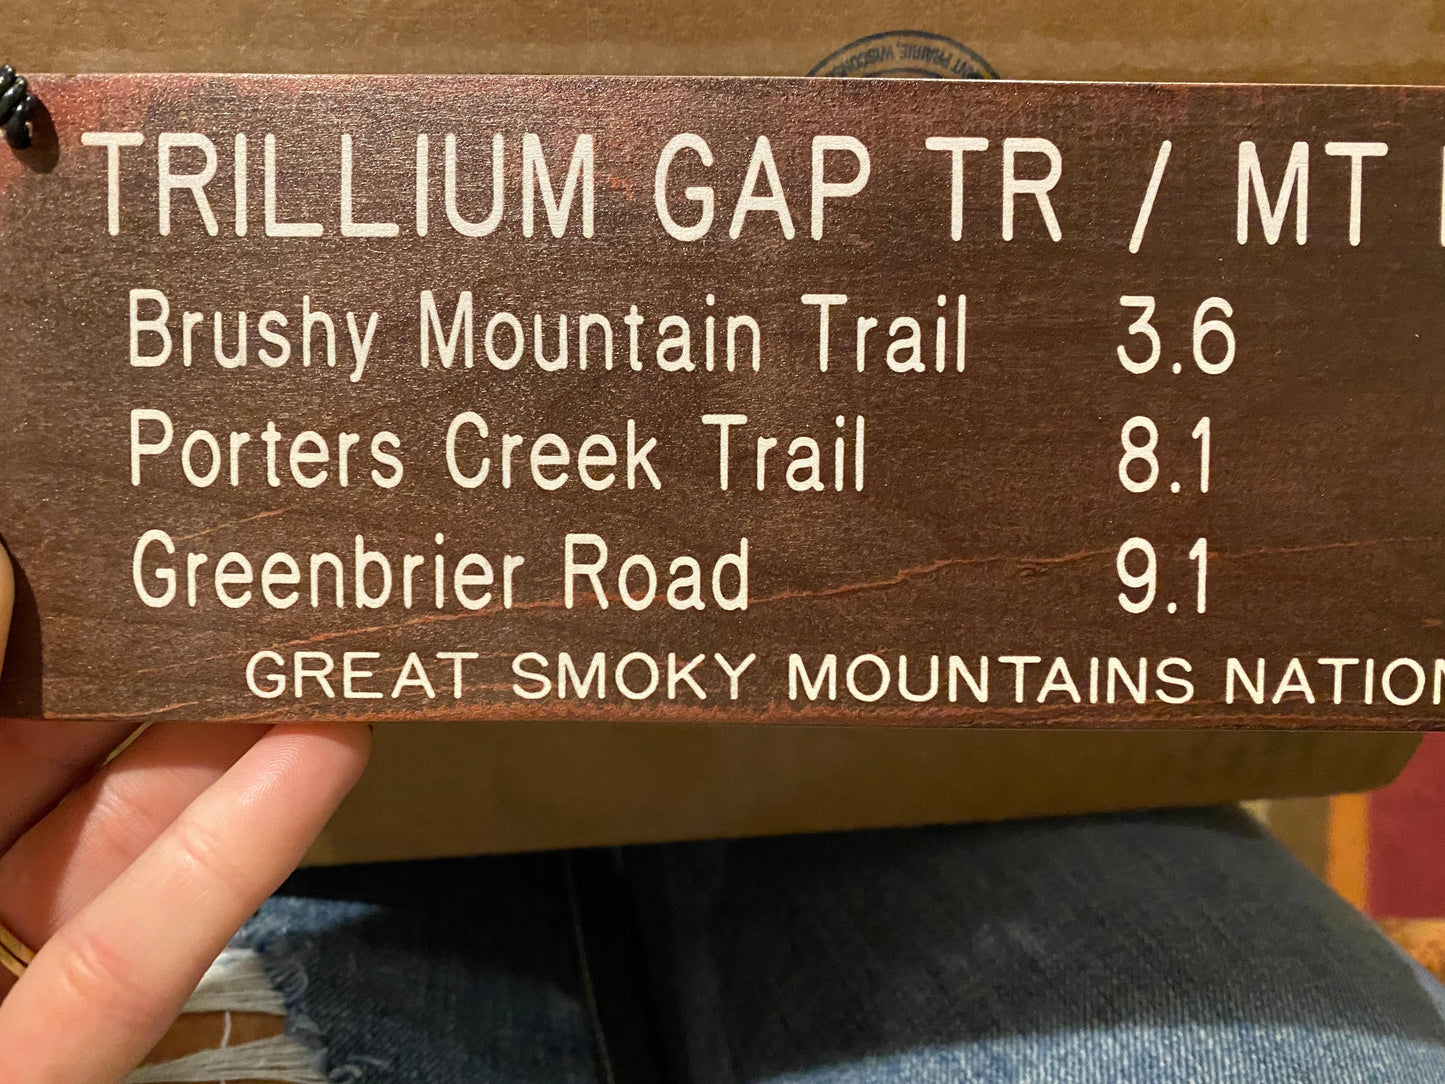 Hiked It. Liked It. Great Smoky Mountains National Park.